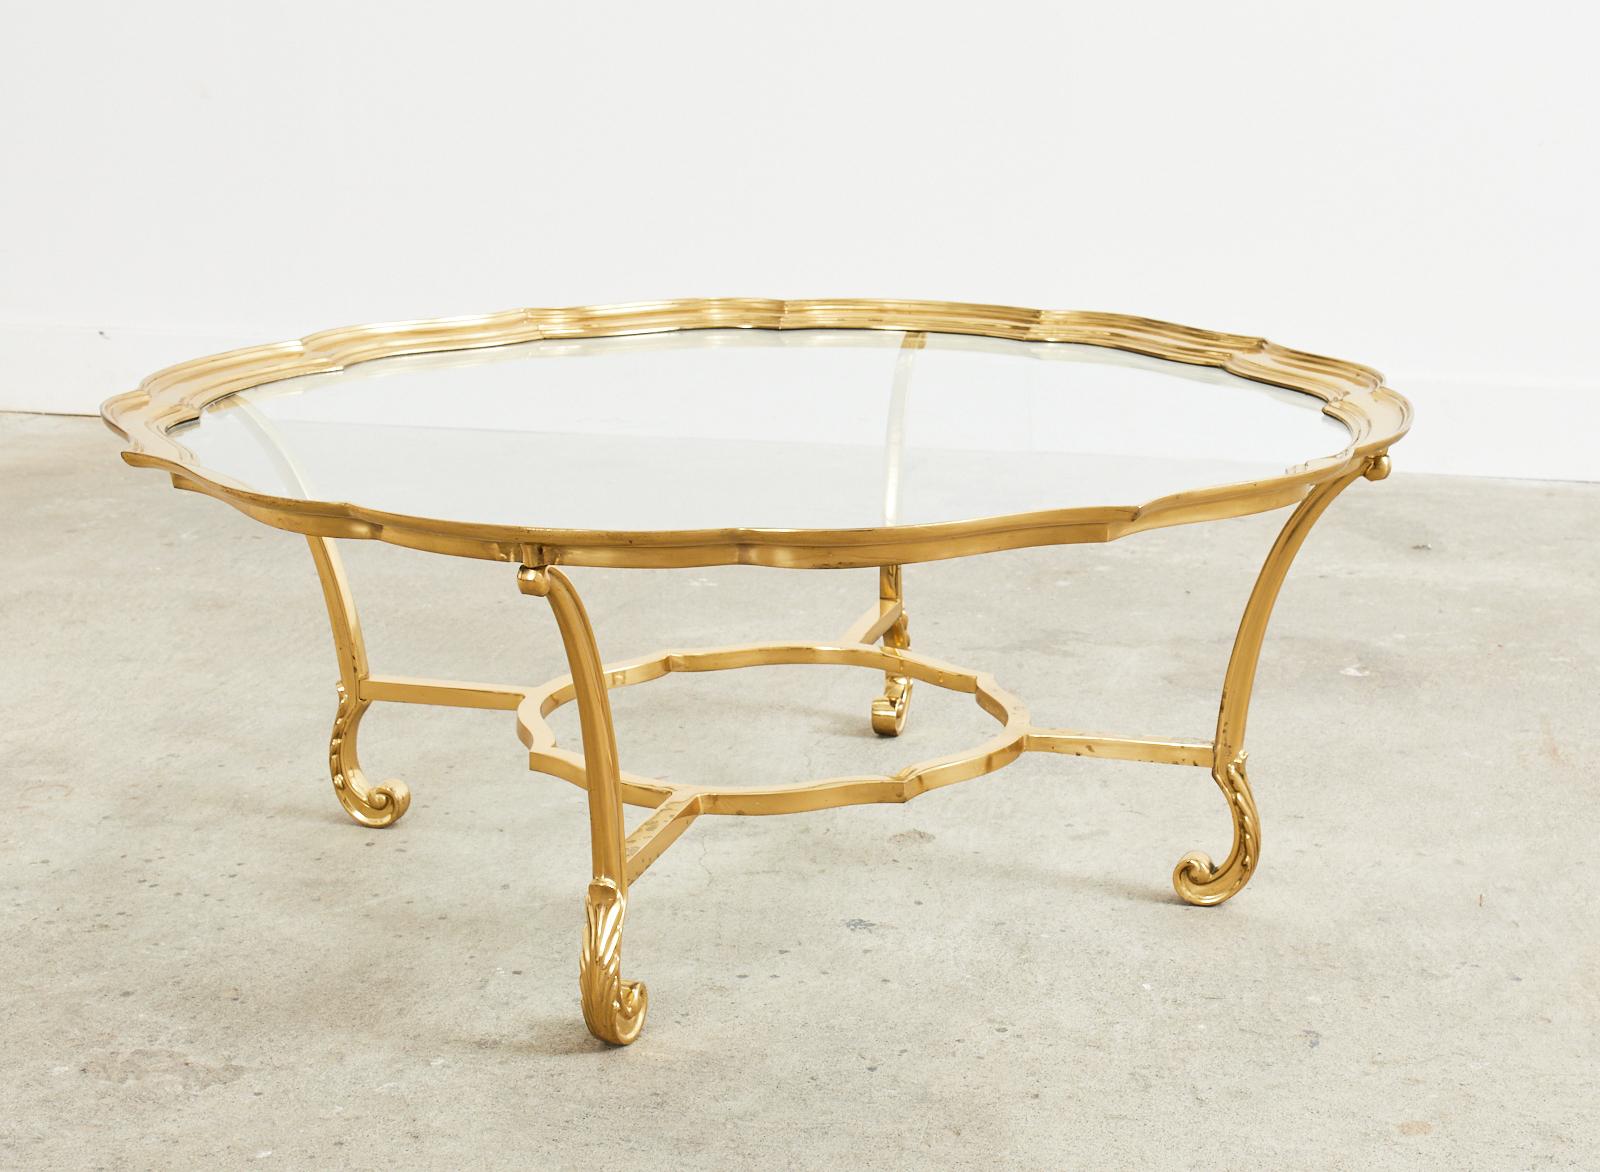 Polished Hollywood Regency Brass Glass Cocktail Table by Labarge